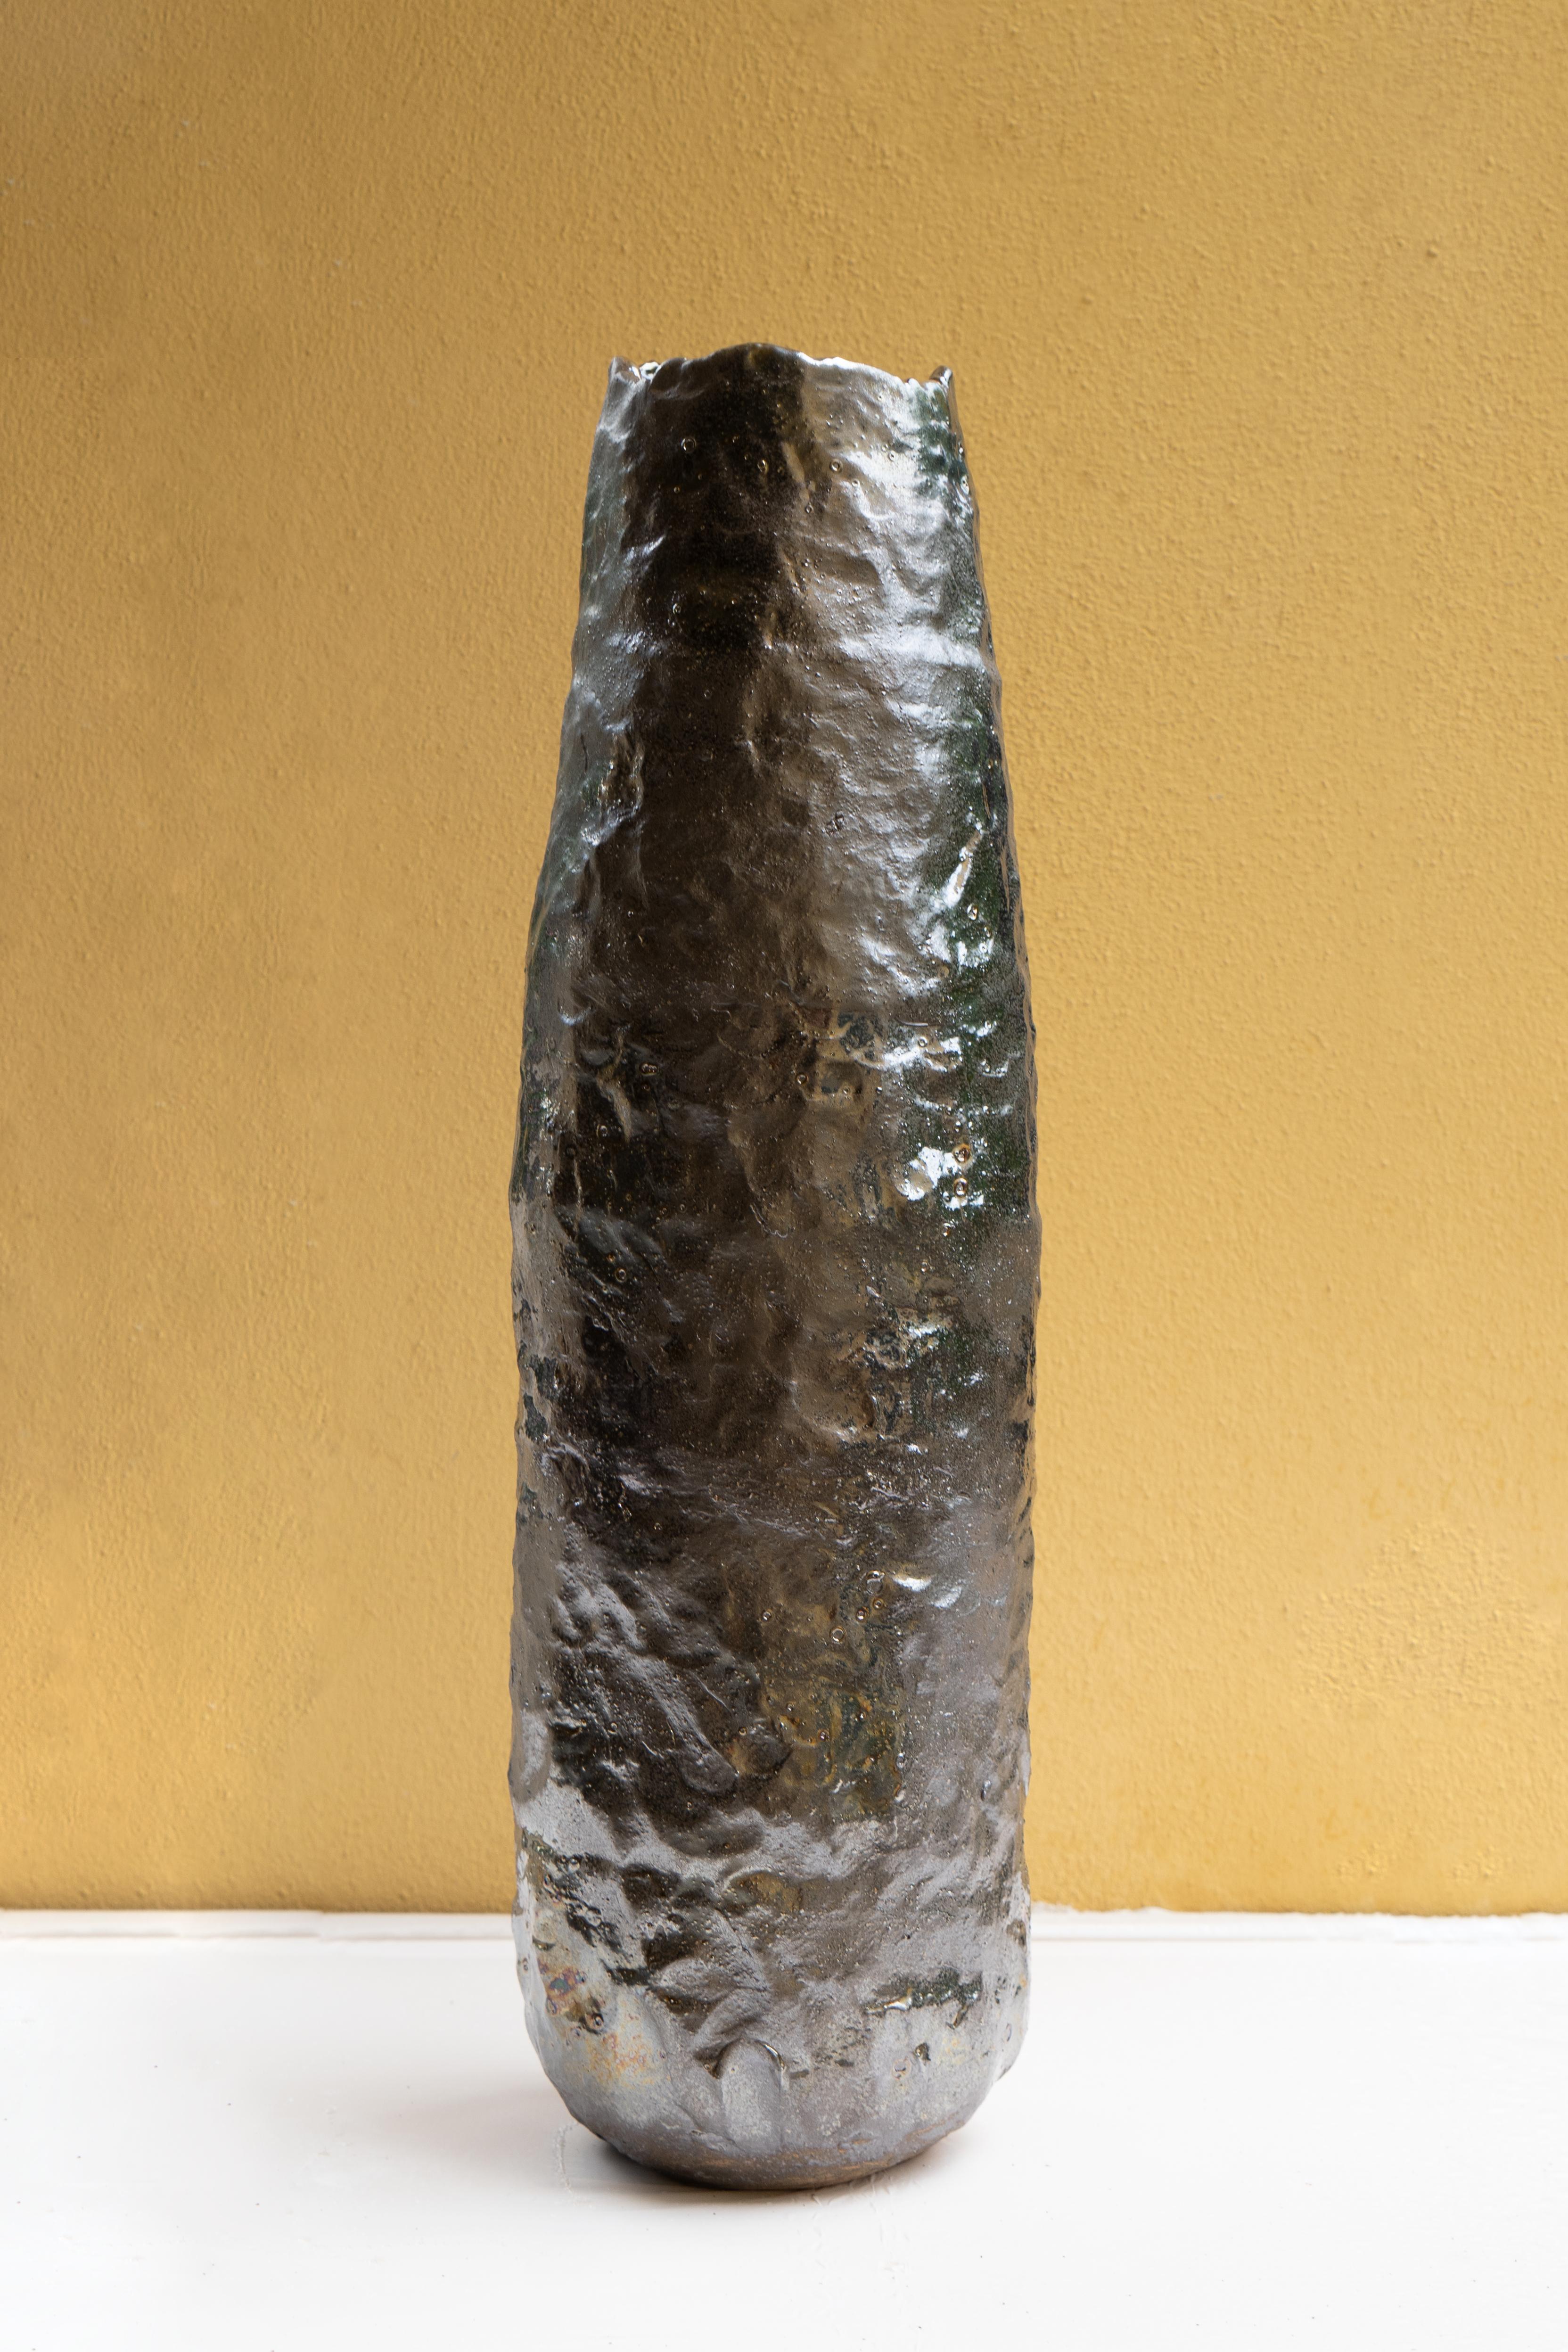 Tall silver bronze vase by Daniele Giannetti
Dimensions: Ø 63 x H 20 cm.
Materials: Glazed terracotta. 

All pieces are made in terracotta from Montelupo, only fired once, then colored by Daniele Giannetti with a white acrylic base, and then a